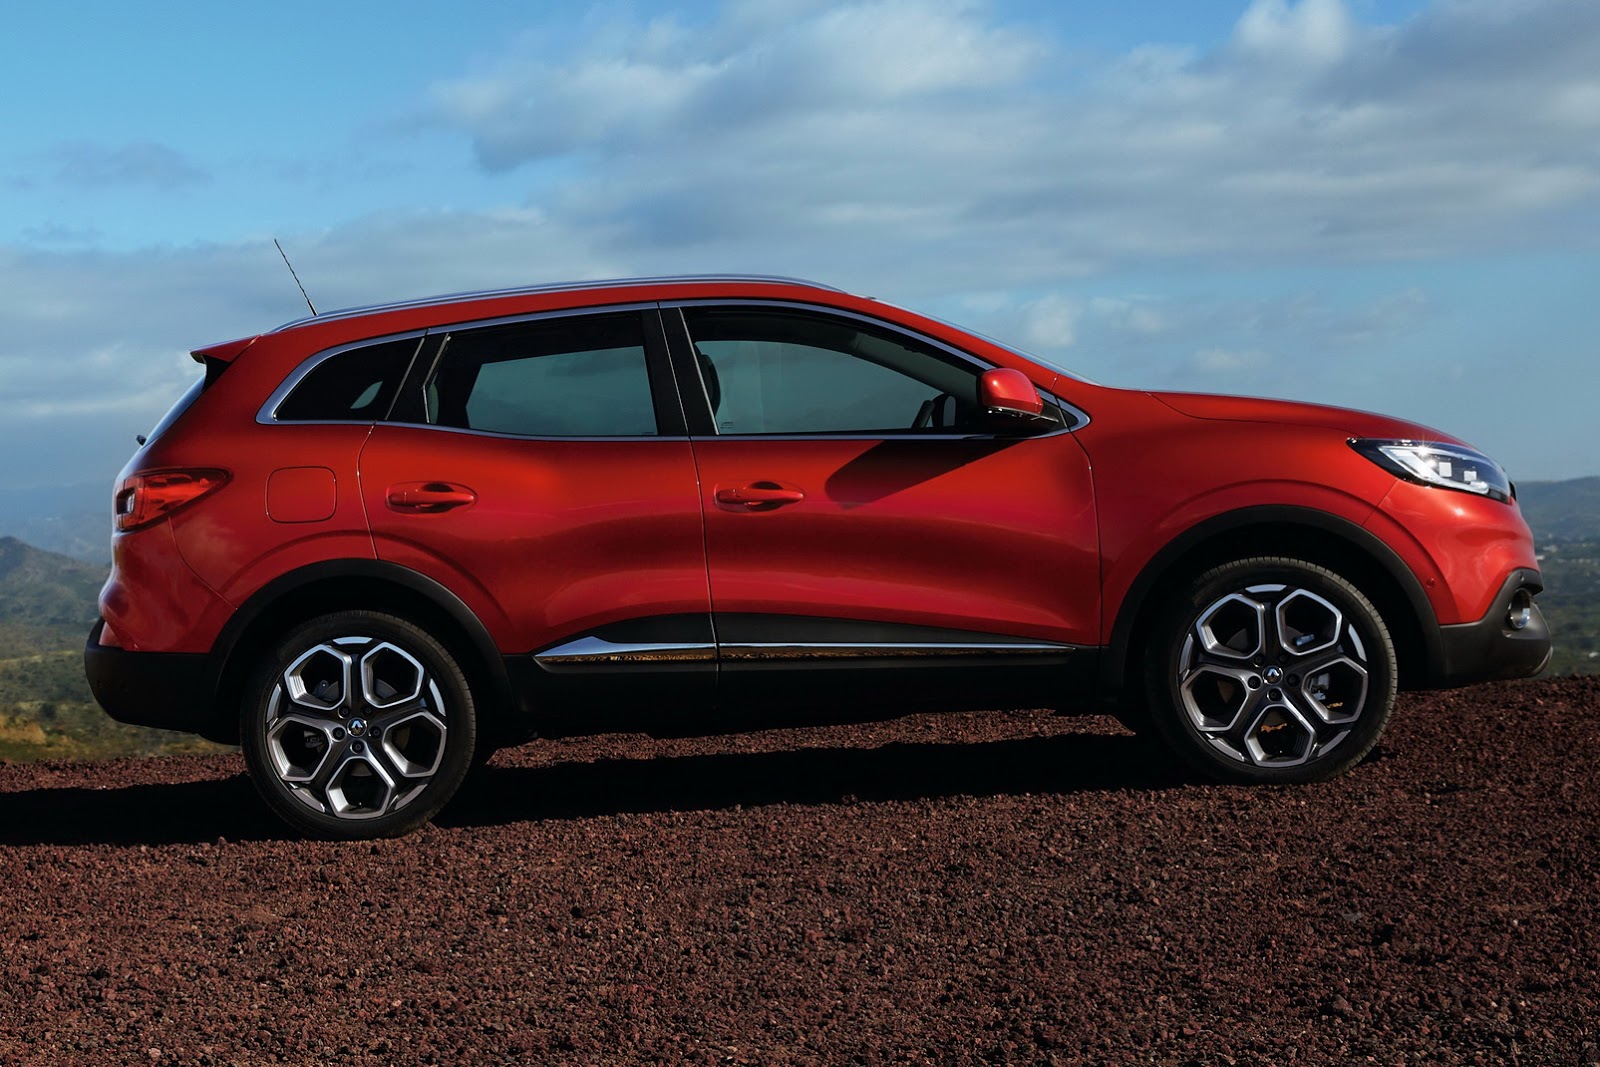 All New Renault Kadjar SUV Officially Revealed 40 Pics amp Video carscoops com